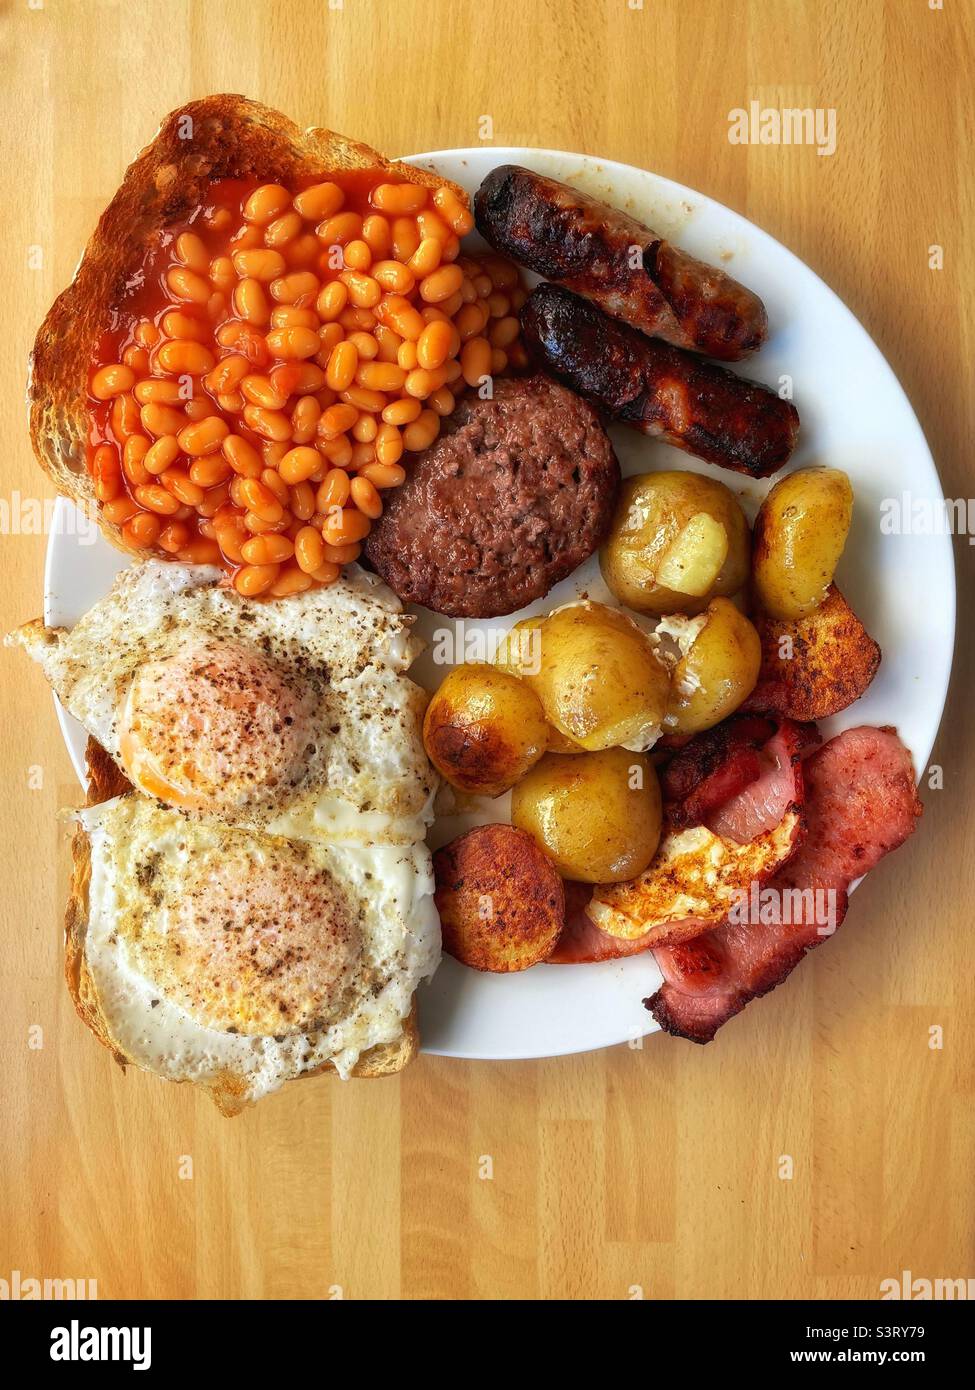 Monster brunch- eggs, sausages, bacon, potatoes, beans, toast and a burger. Stock Photo